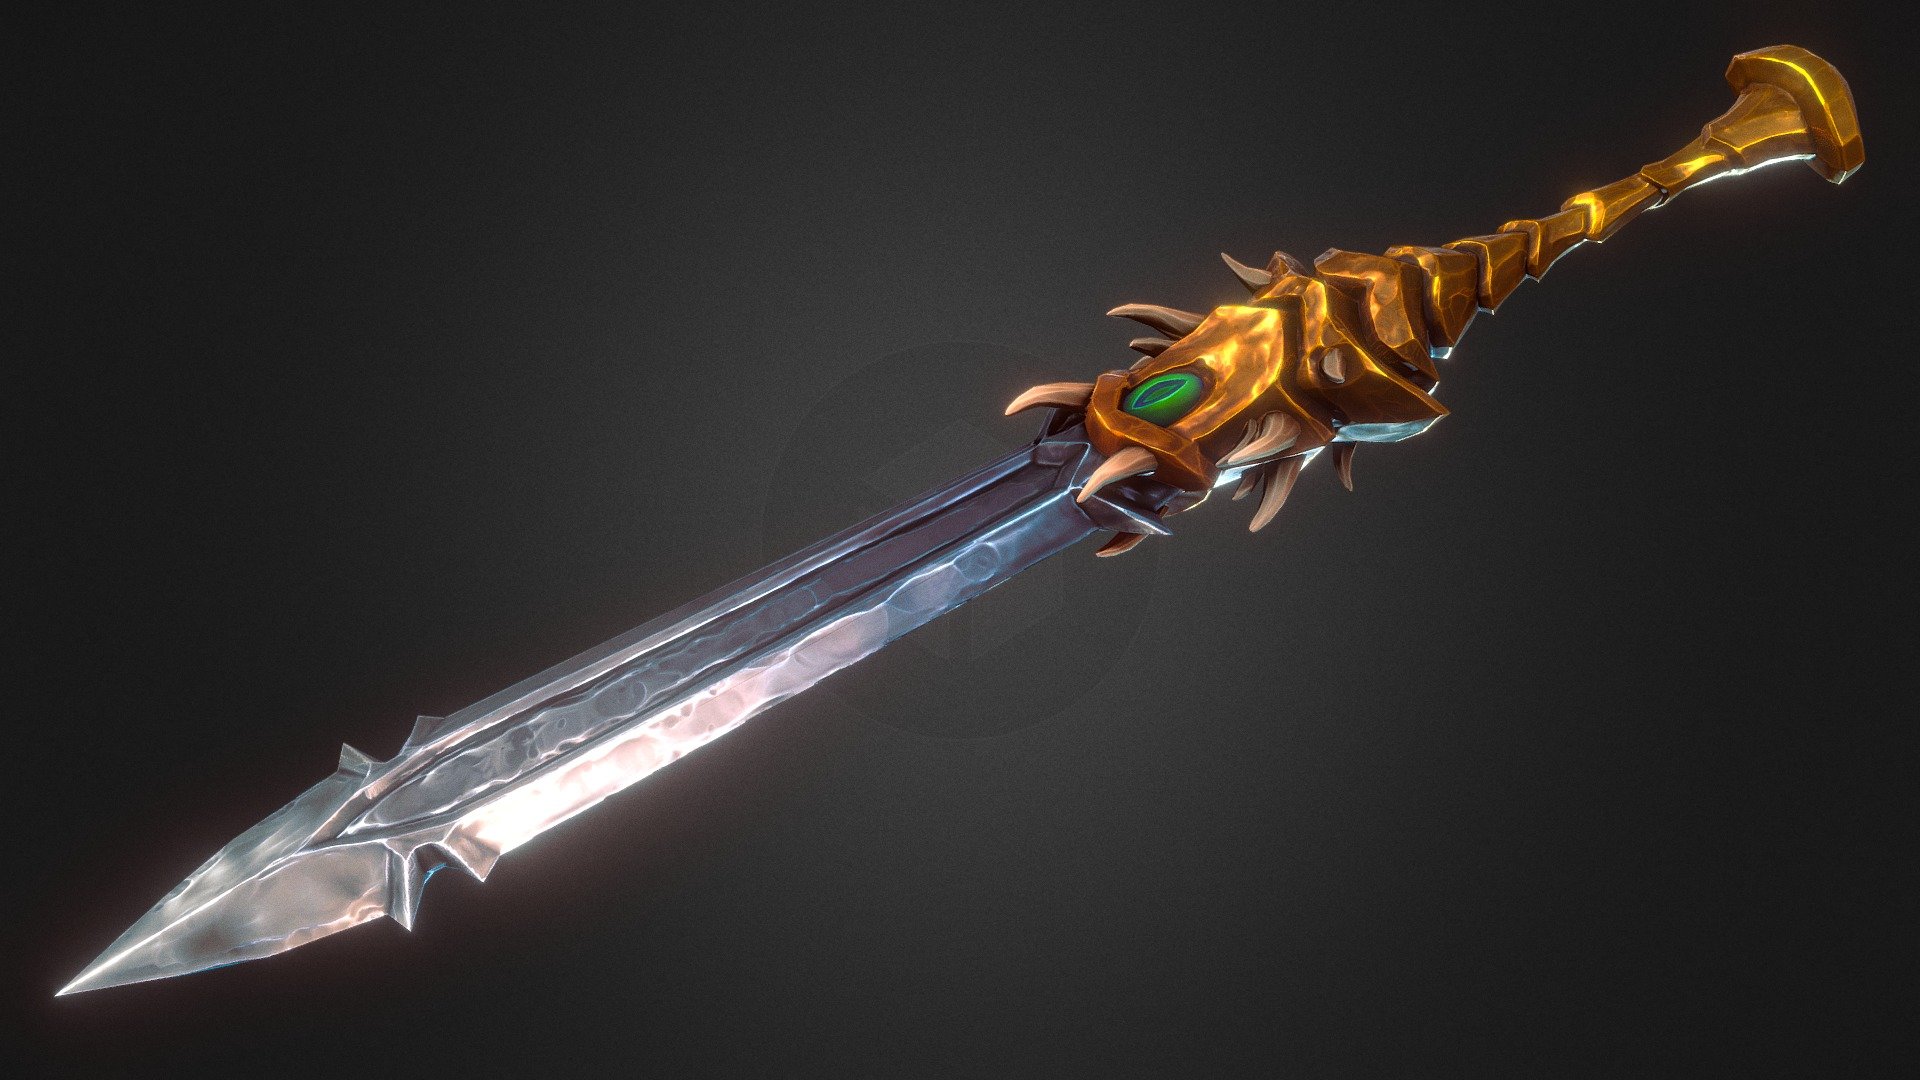 A stylized sword that I was commissioned to make this year. This was one variant of a set.

View on Artstation:
https://www.artstation.com/artwork/Qrg9XL

Commission Concept:
https://www.artstation.com/artwork/Pm9XD3 - Ogrim Blade - 3D model by RachelC (@rachelclarkediting) 3d model